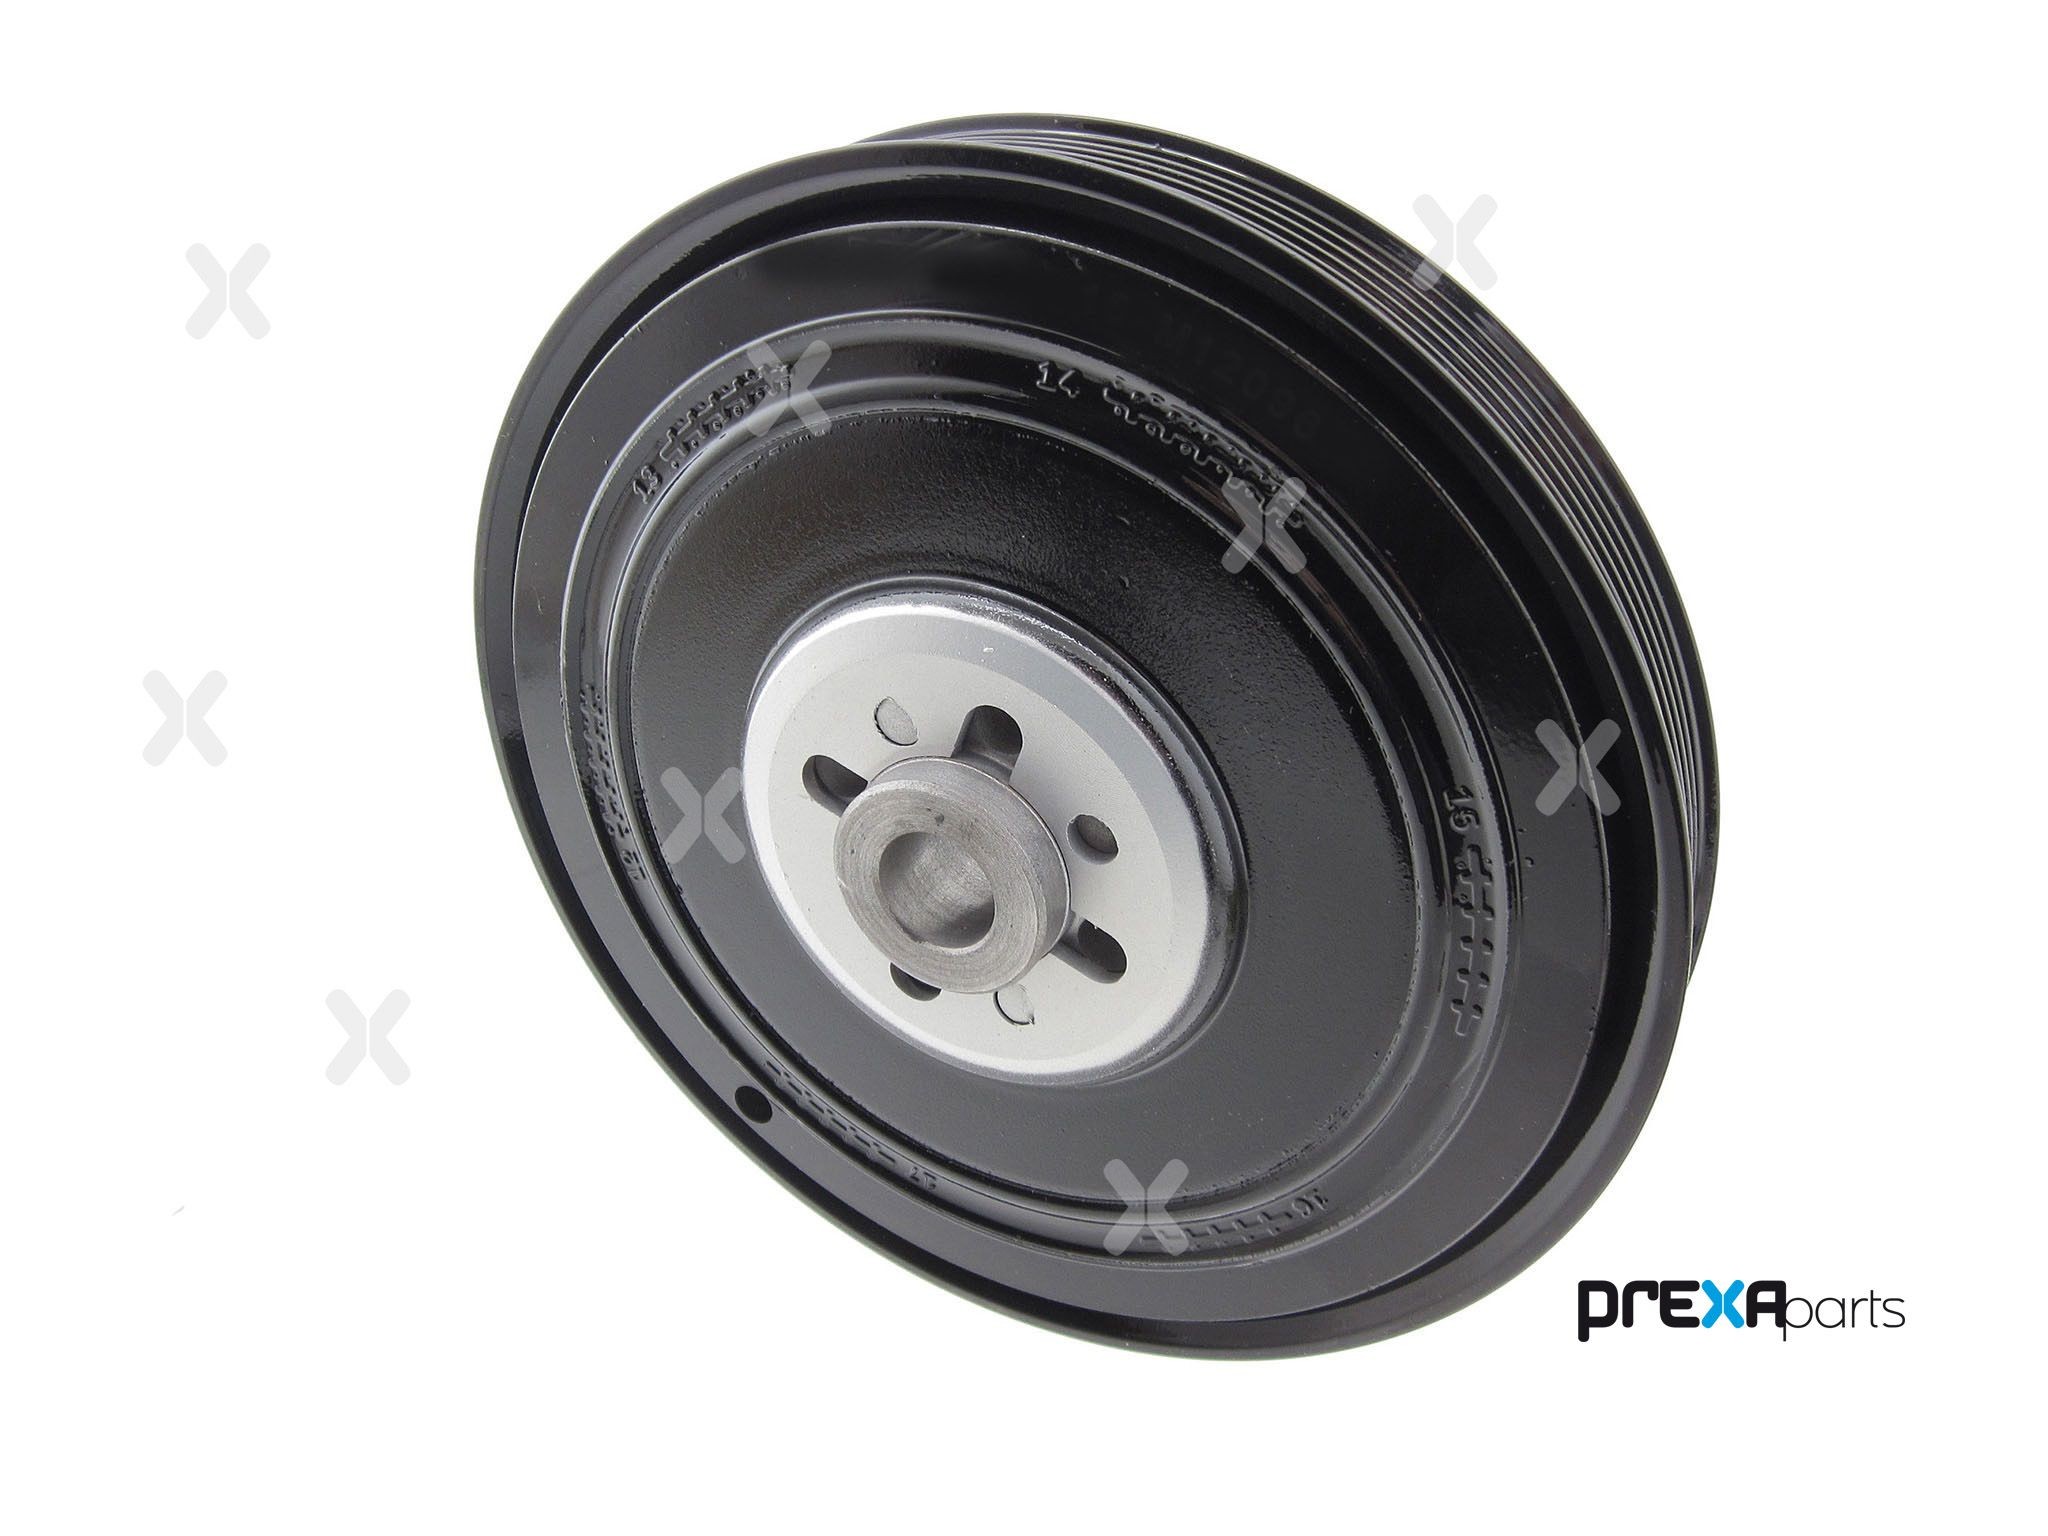 Crankshaft pulley PREXAparts P125001 - Volkswagen Polo I Hatchback (86) Belts, chains, rollers spare parts order